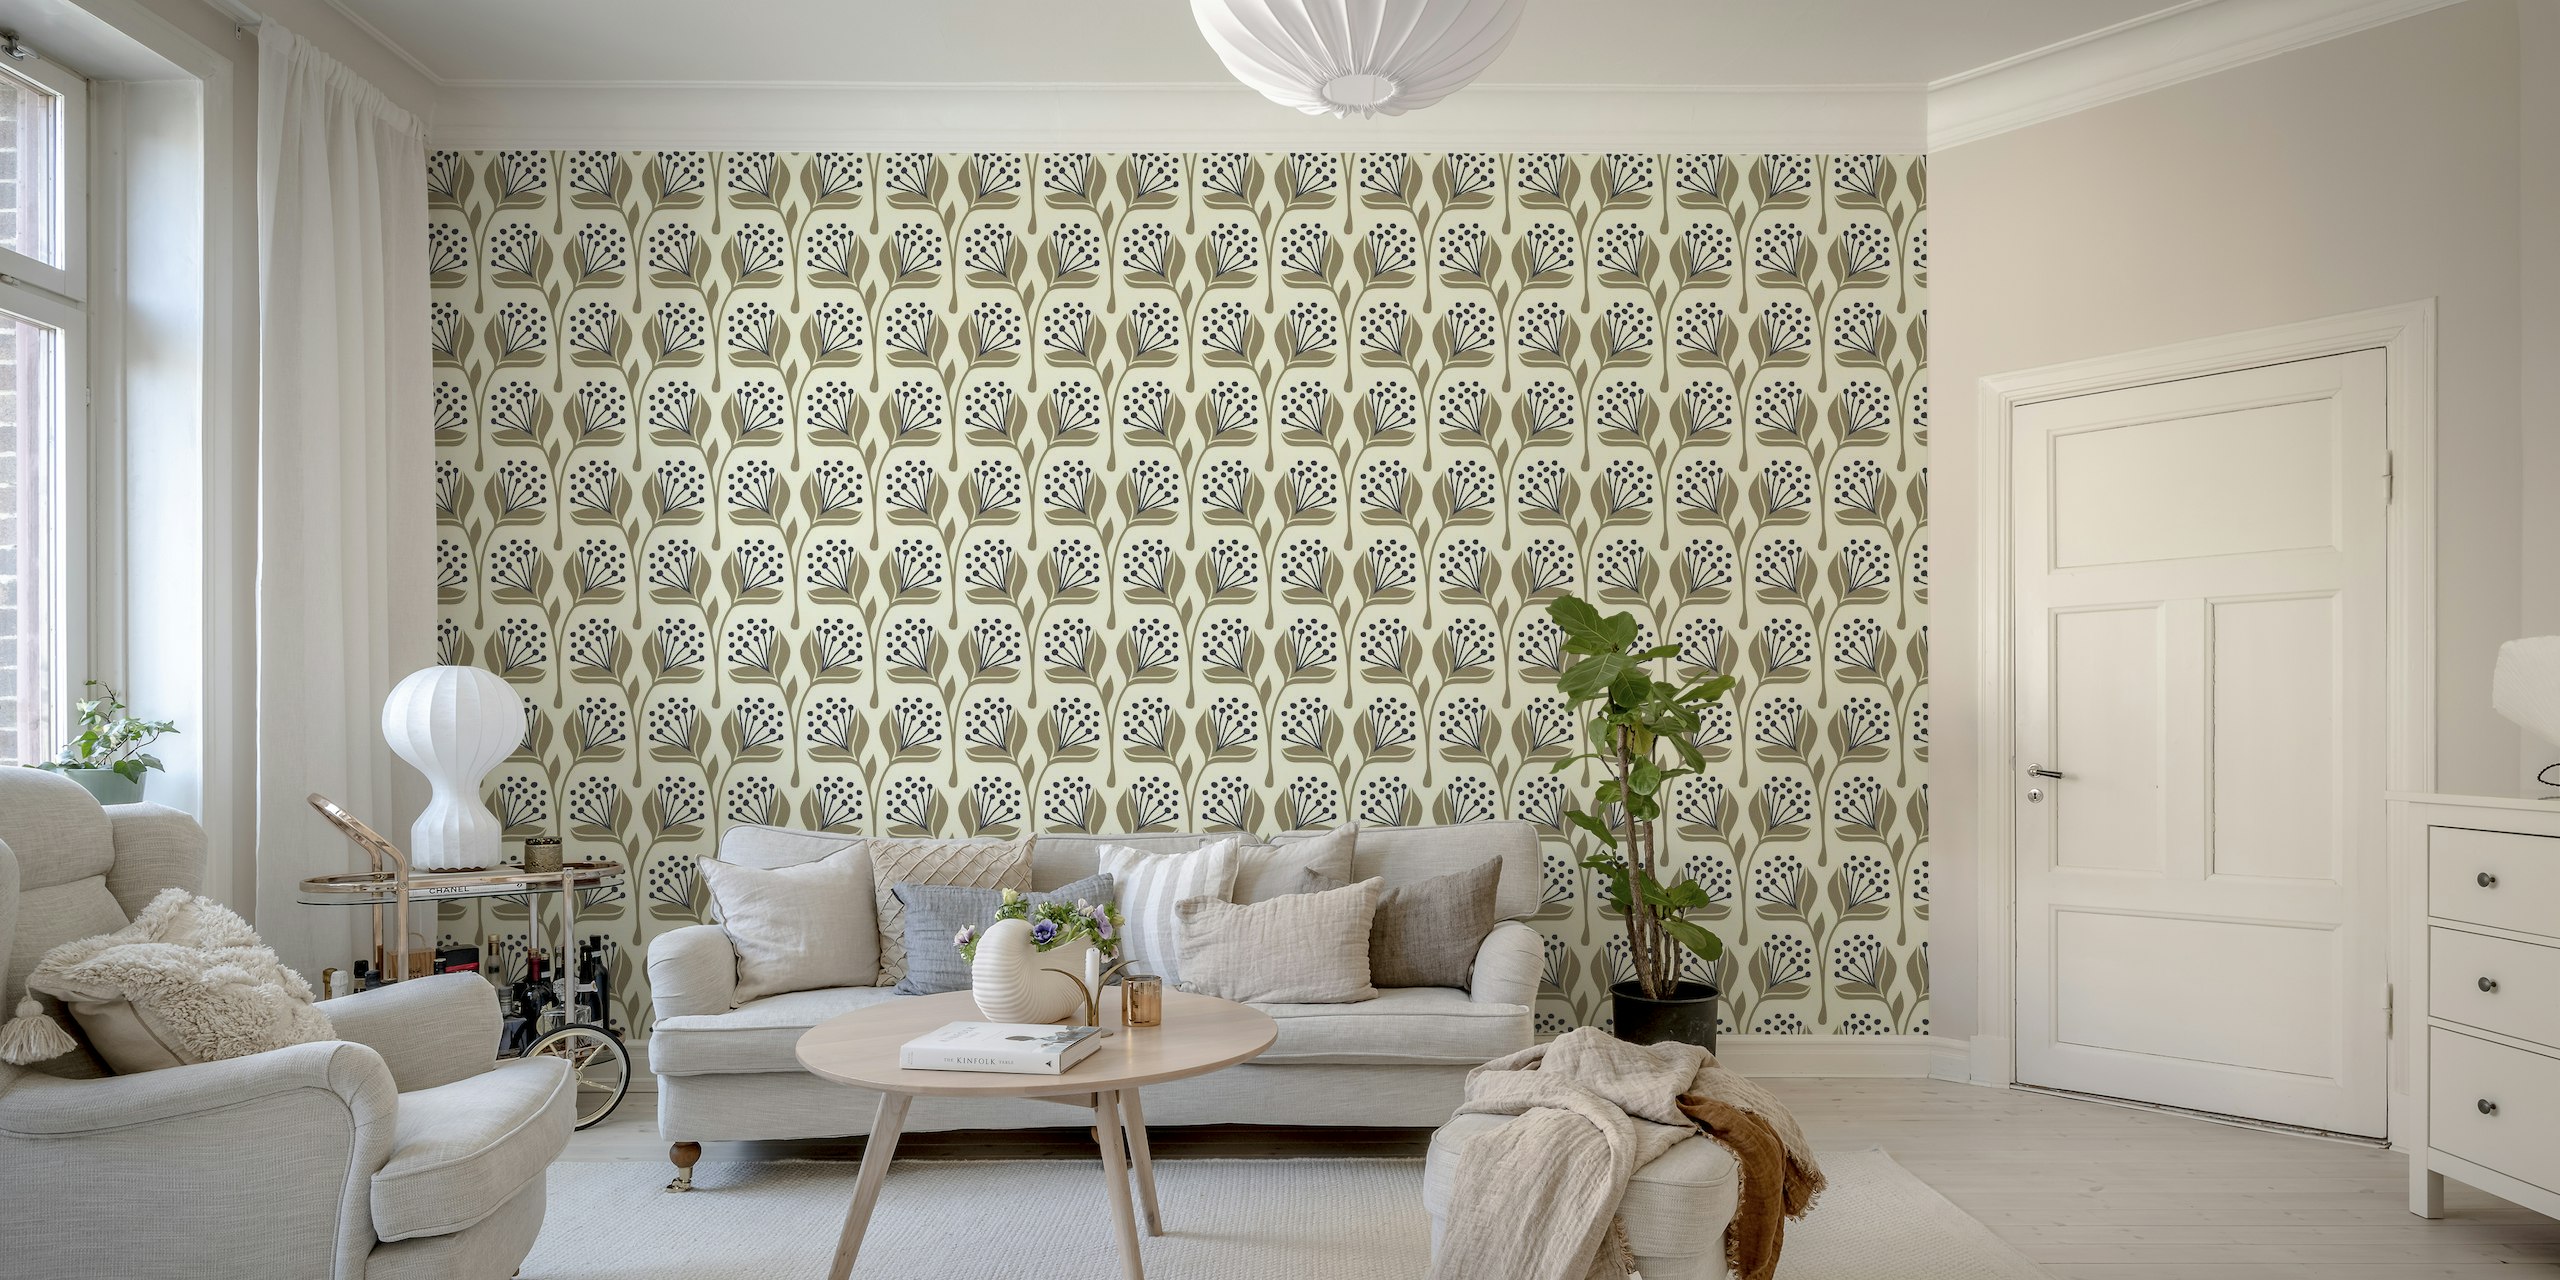 Beige hand-drawn floral wall mural with vintage vibes